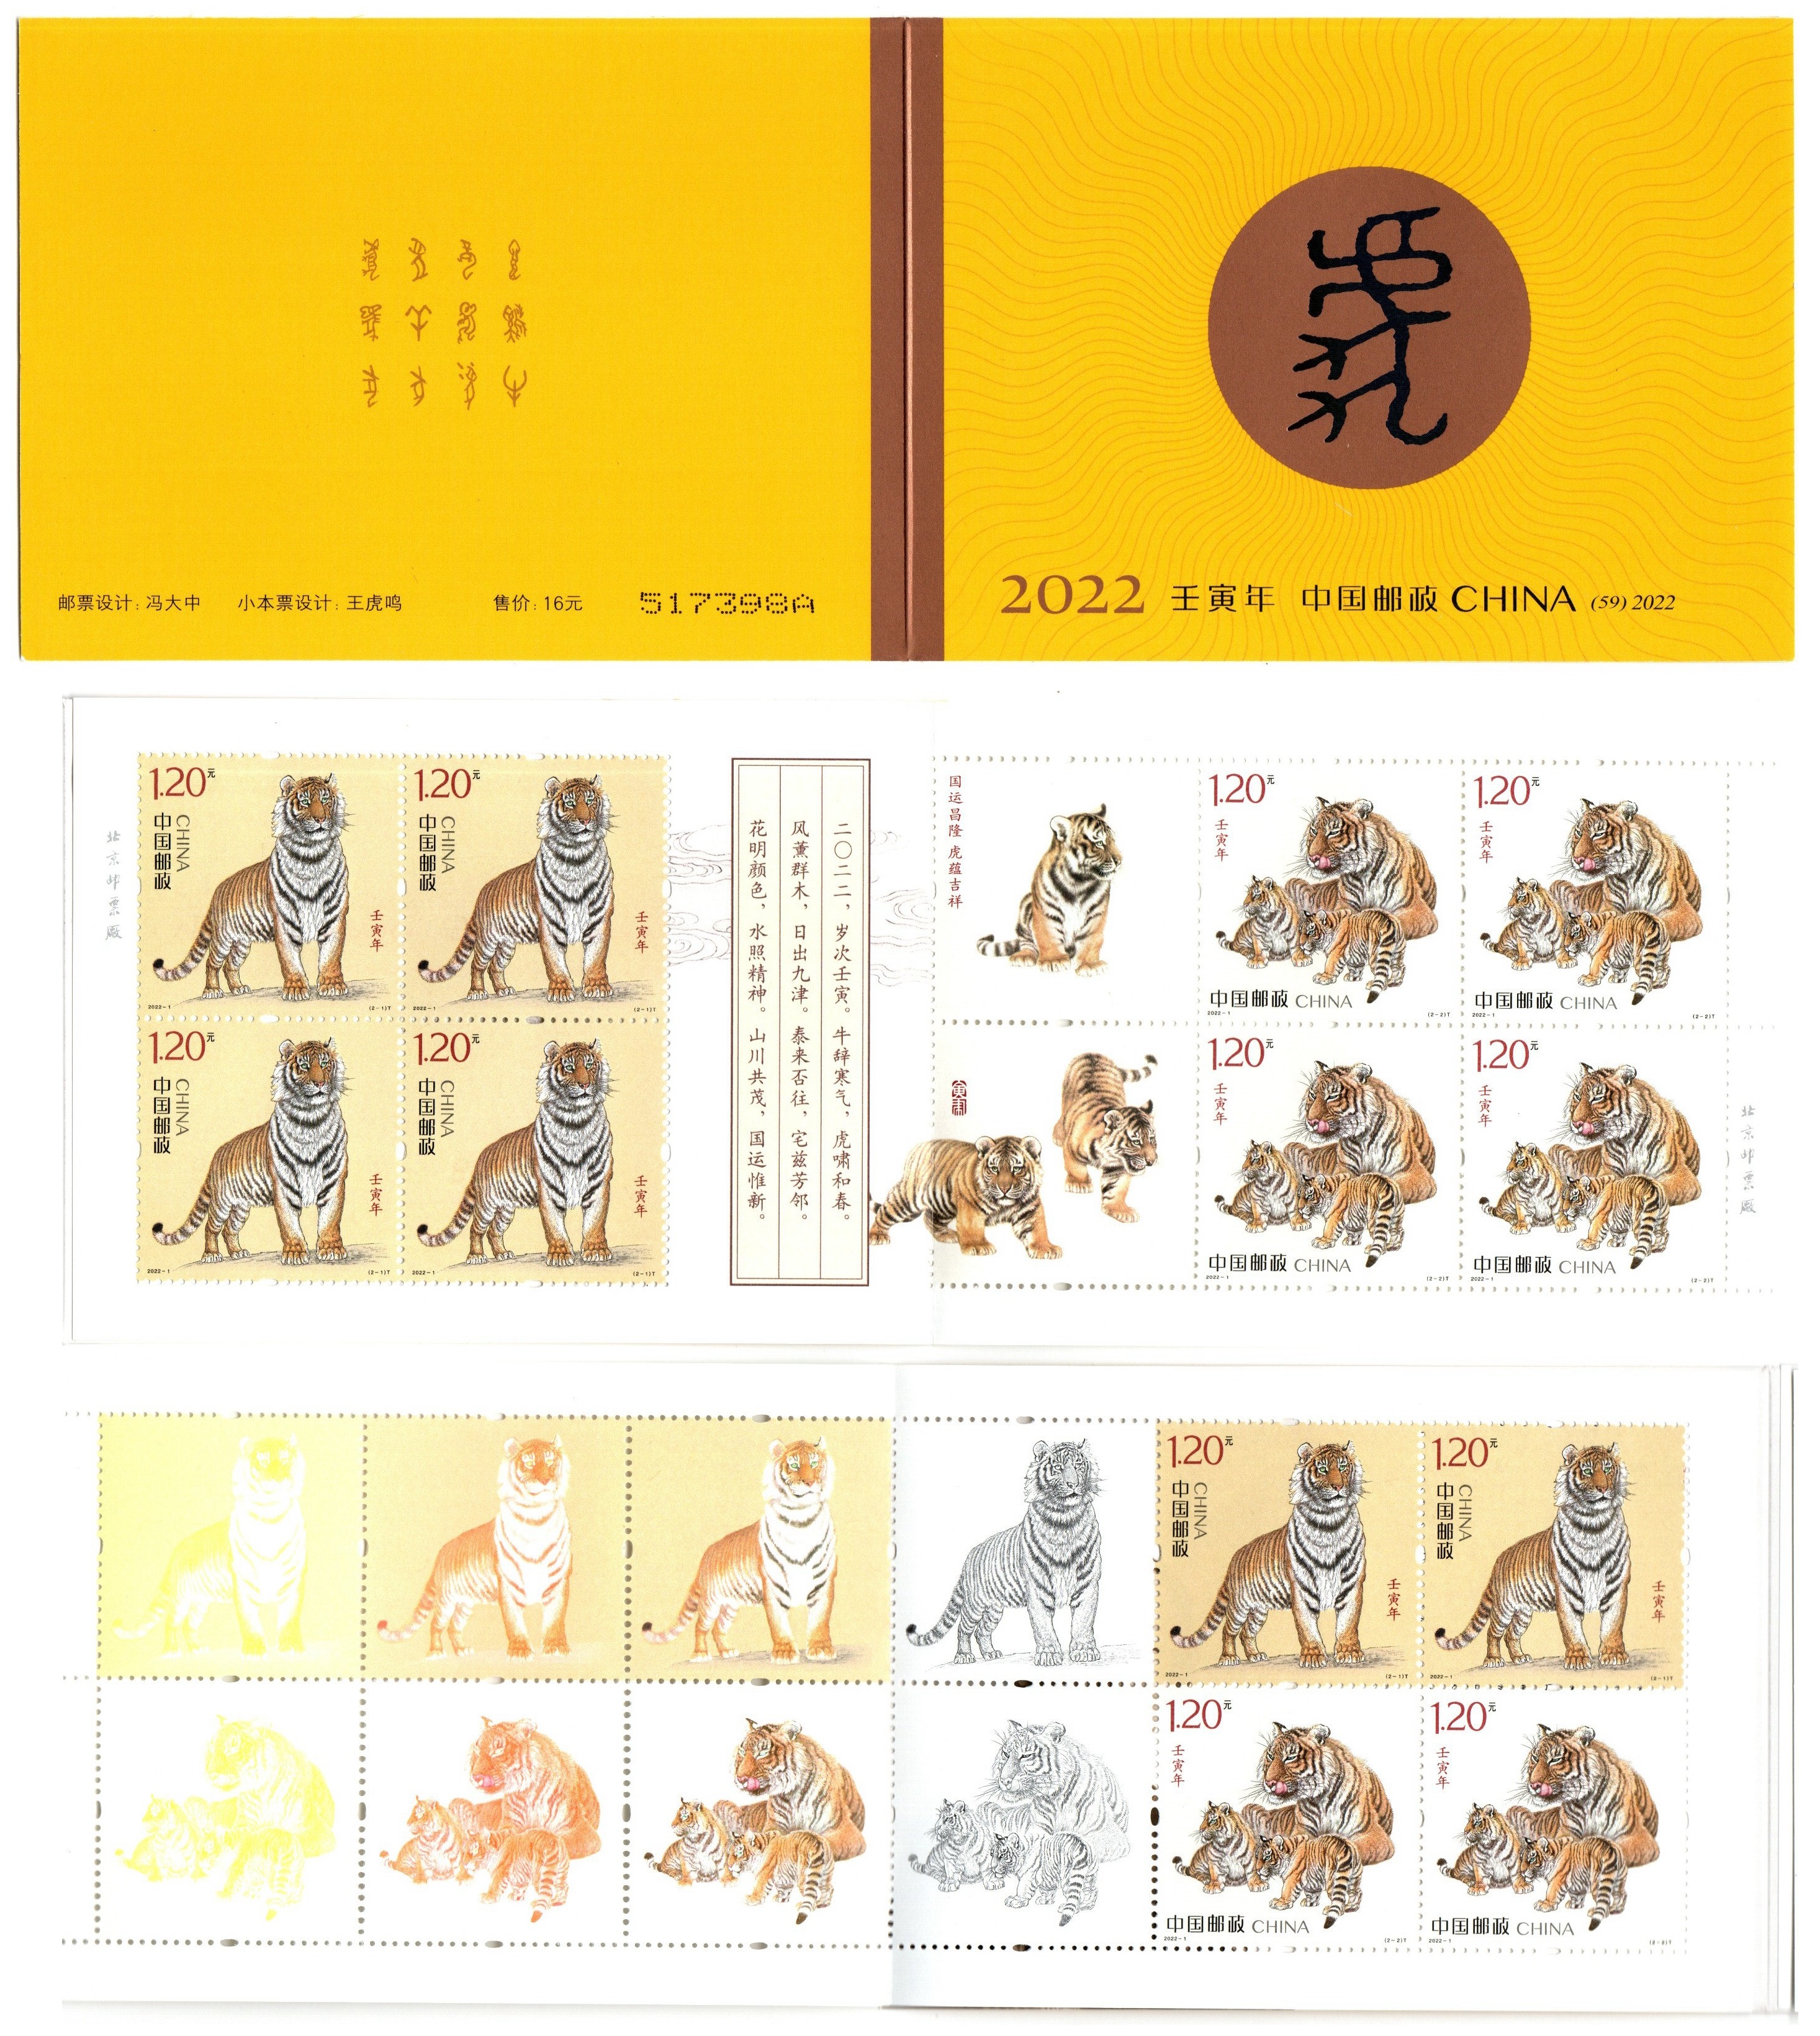 M2359, China Stamp Booklet, PRC 2022-1, Chinese Zodiac Tiger Stamps